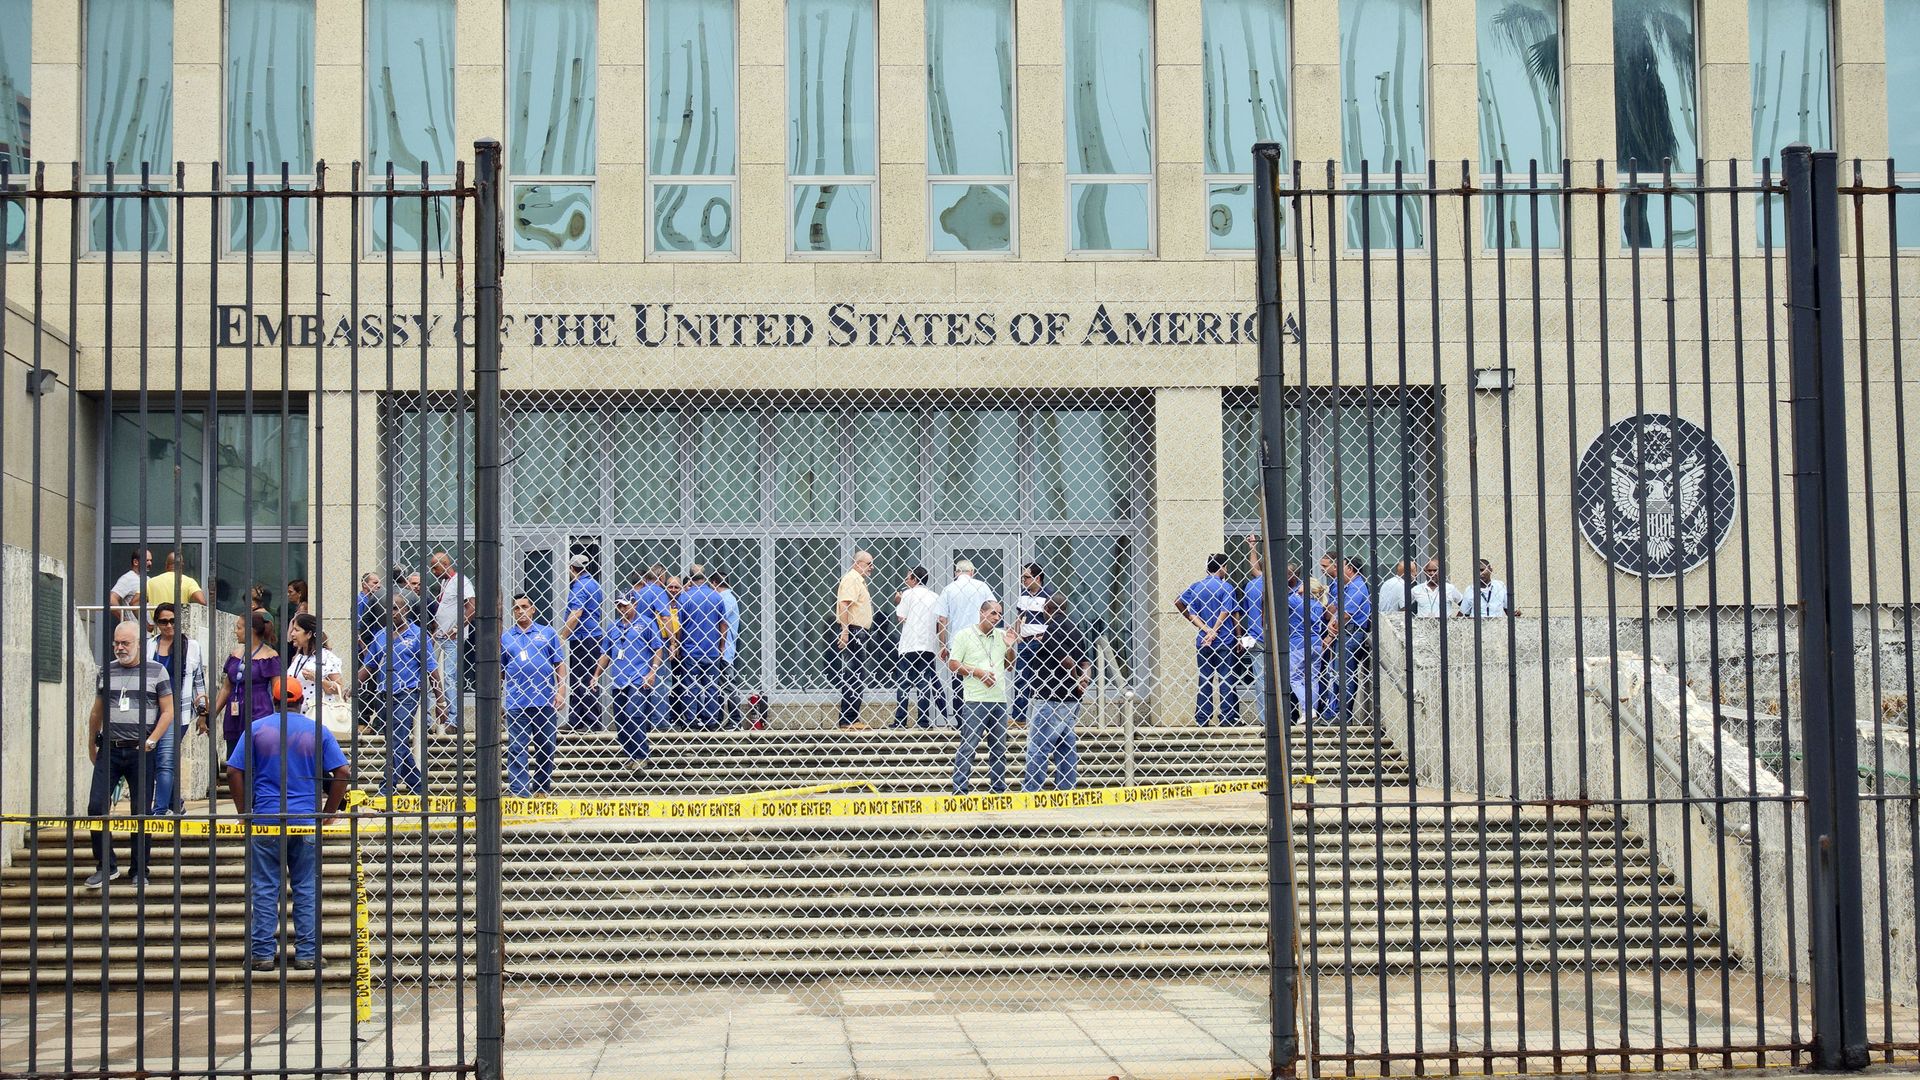 U.S. diplomats' syndrome" in China, Cuba likely energy - Axios